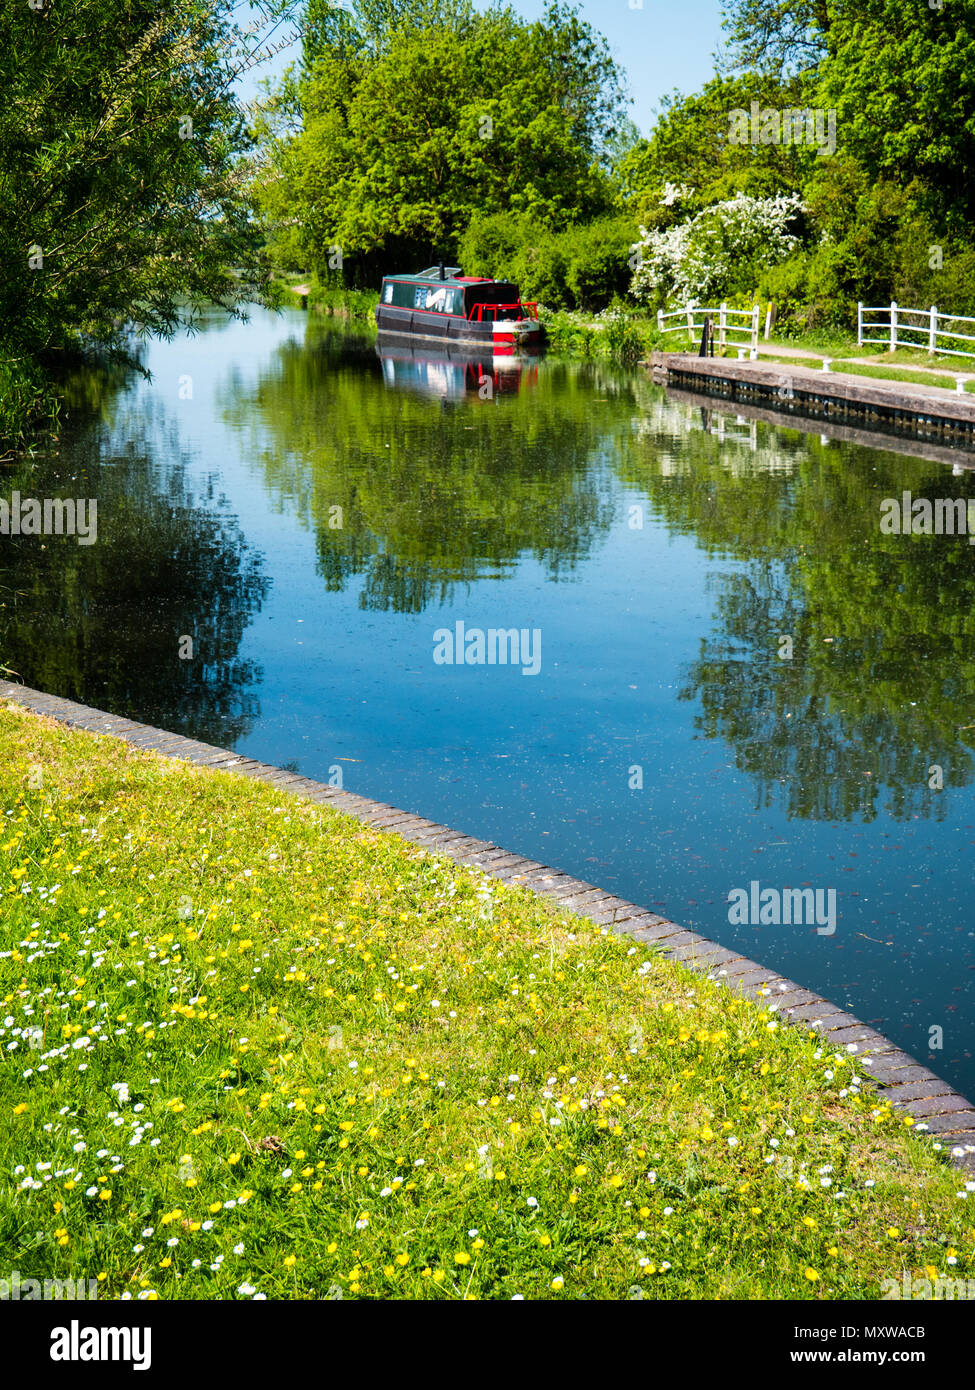 Colthrop Lock is a lock on the Kennet and Avon Canal, at Thatcham, Berkshire, England. Stock Photo